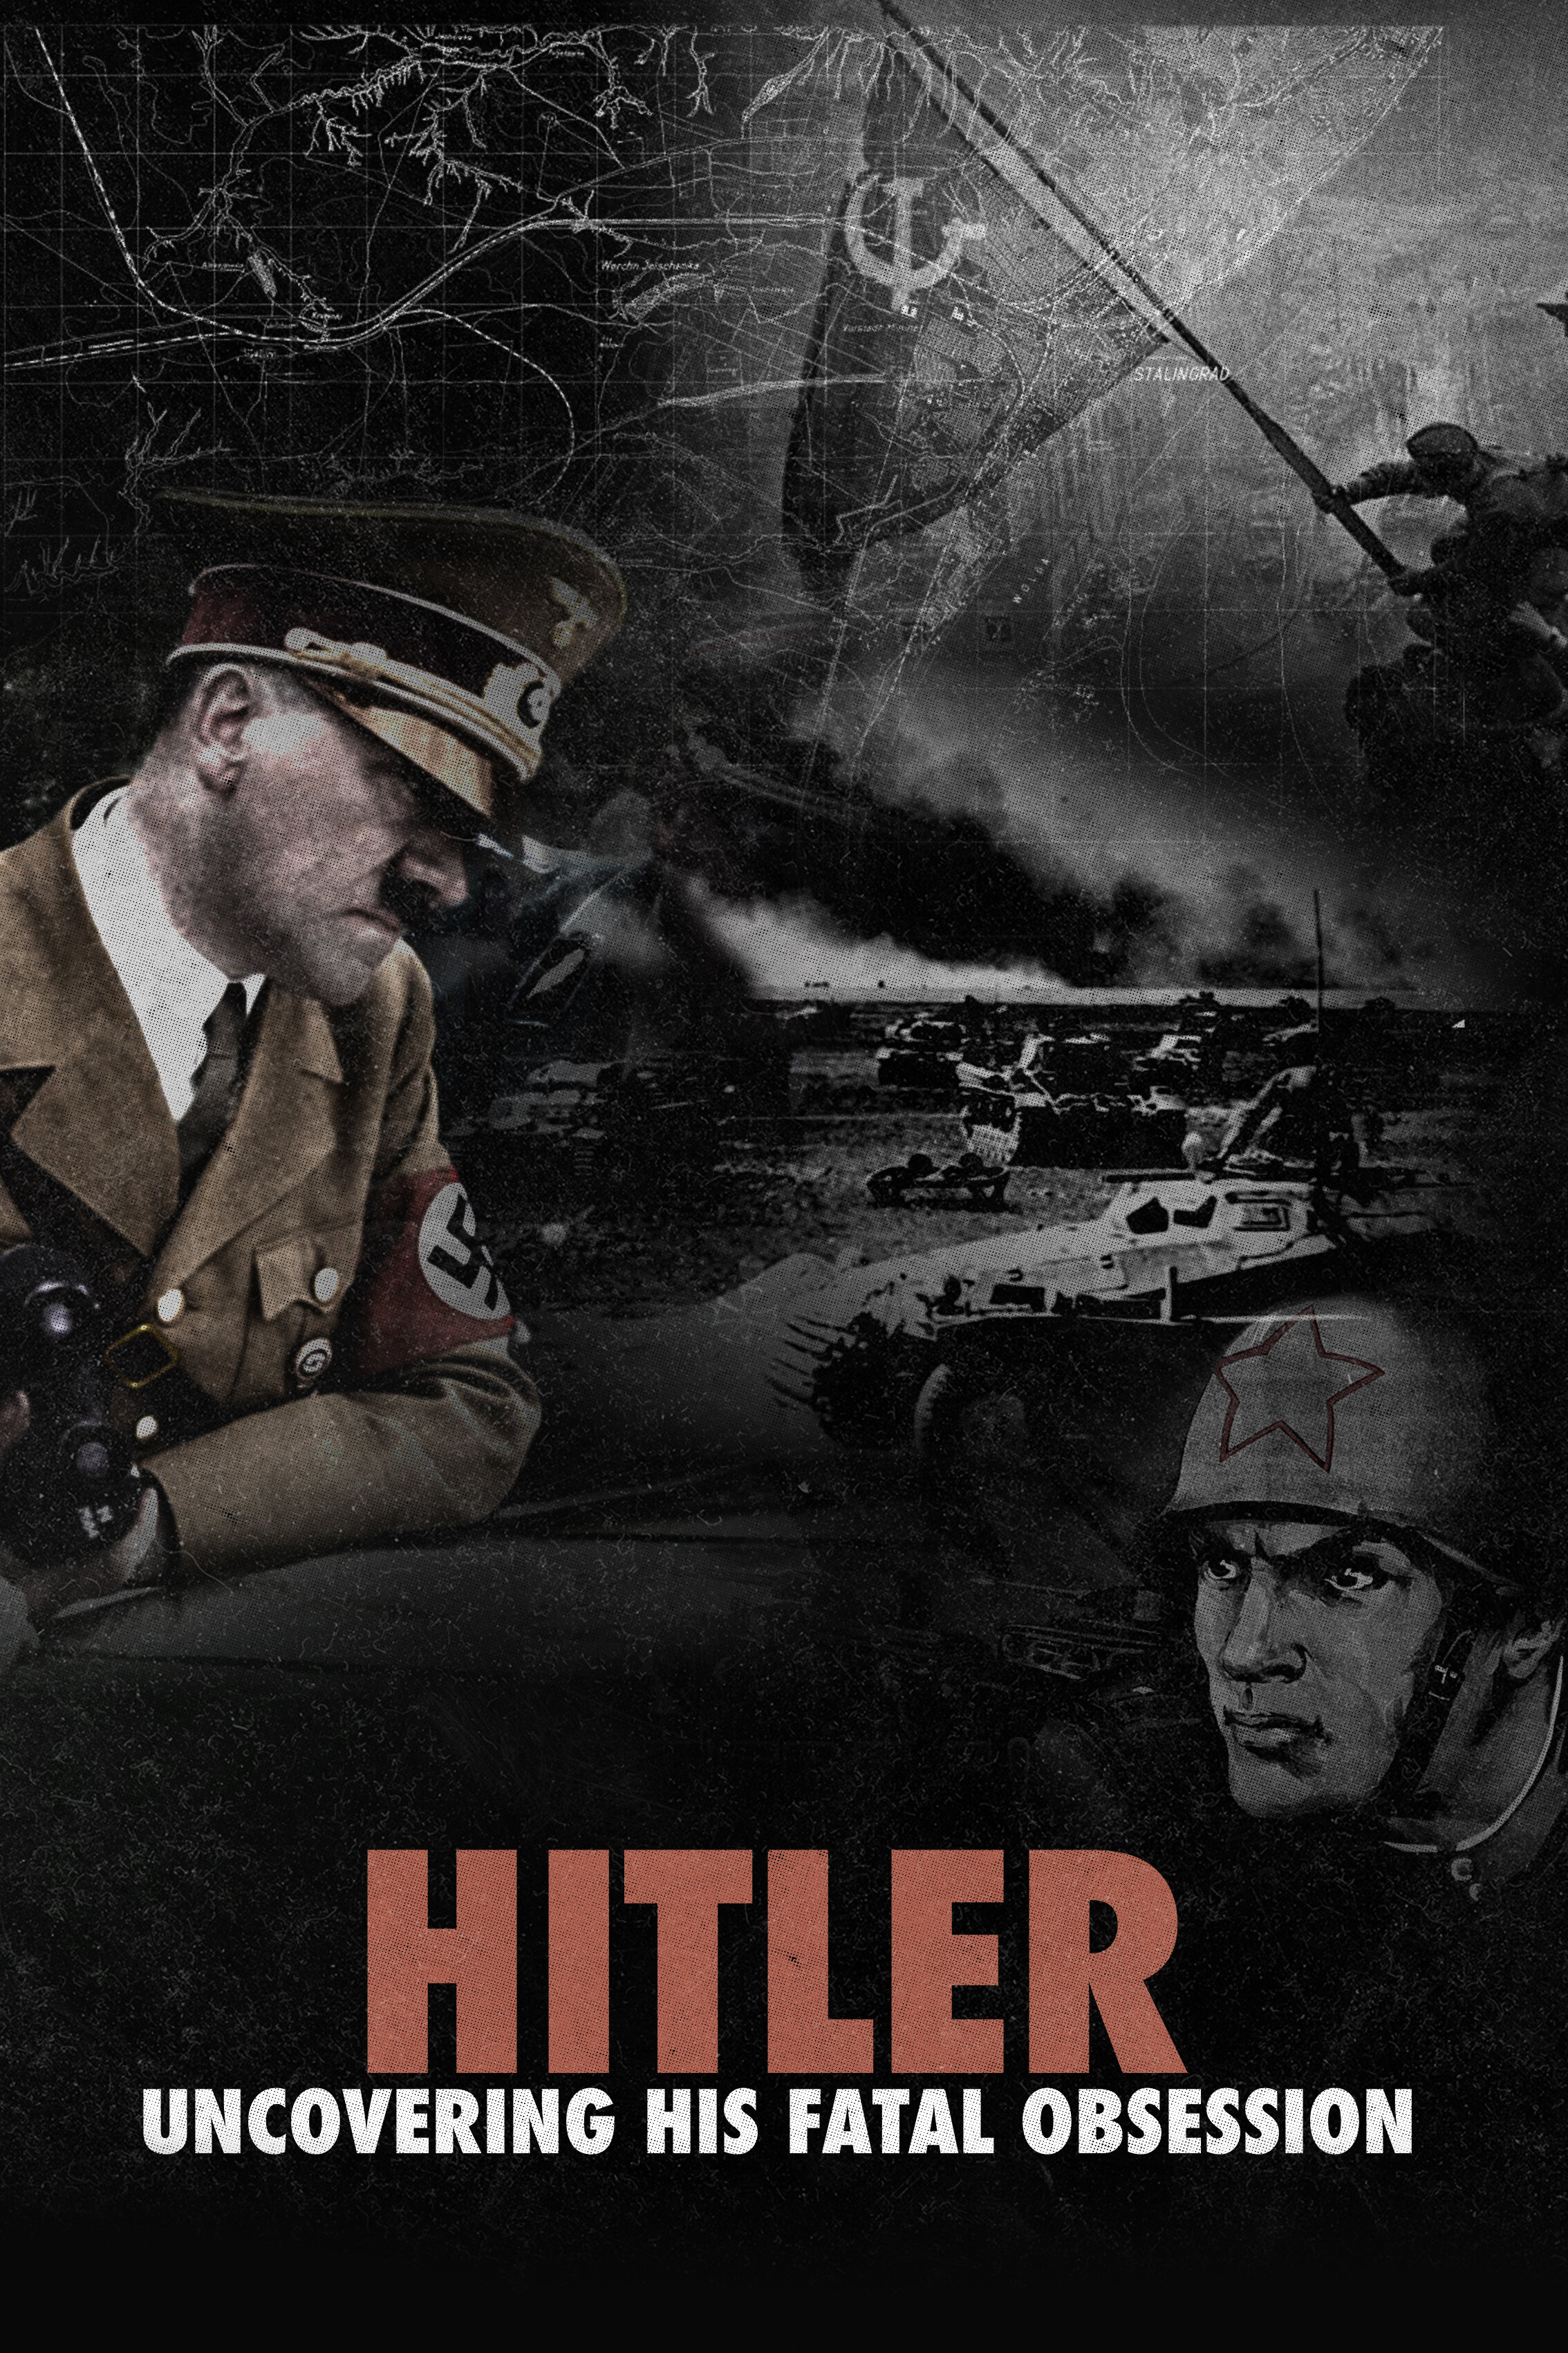 Hitler: Uncovering His Fatal Obsession ne zaman